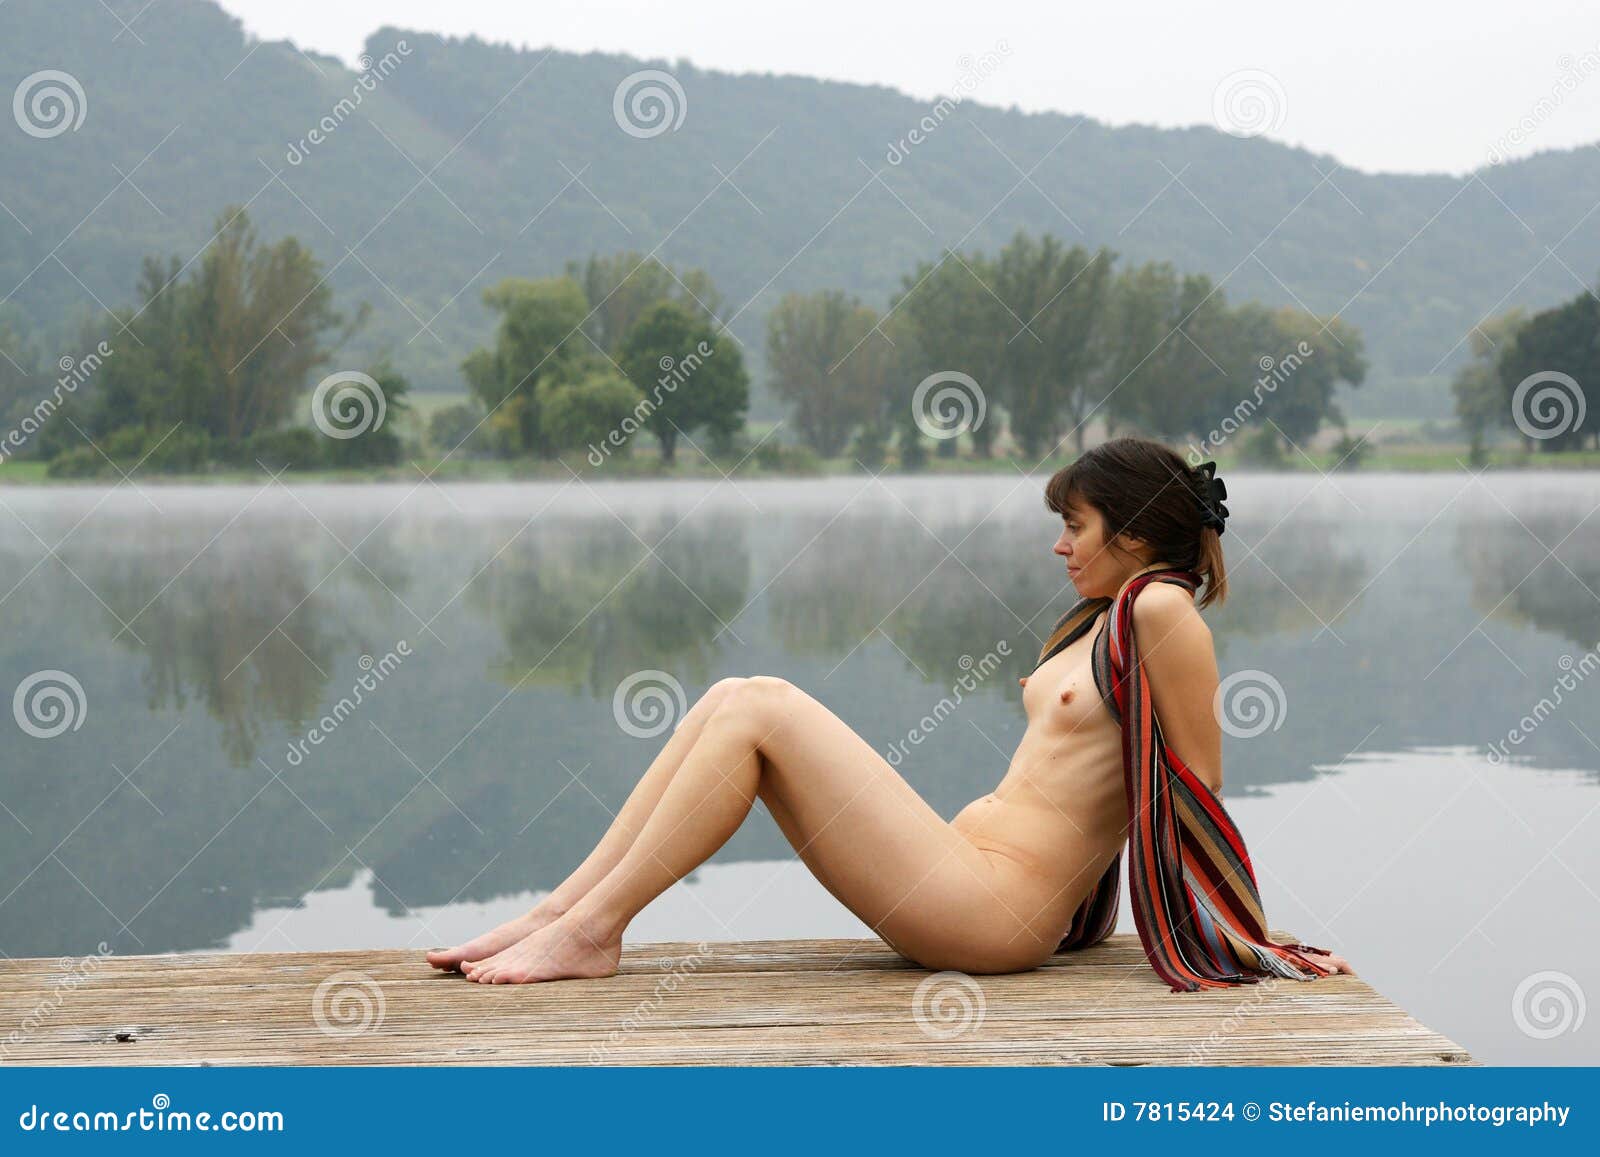 Lake nude by the Naked by